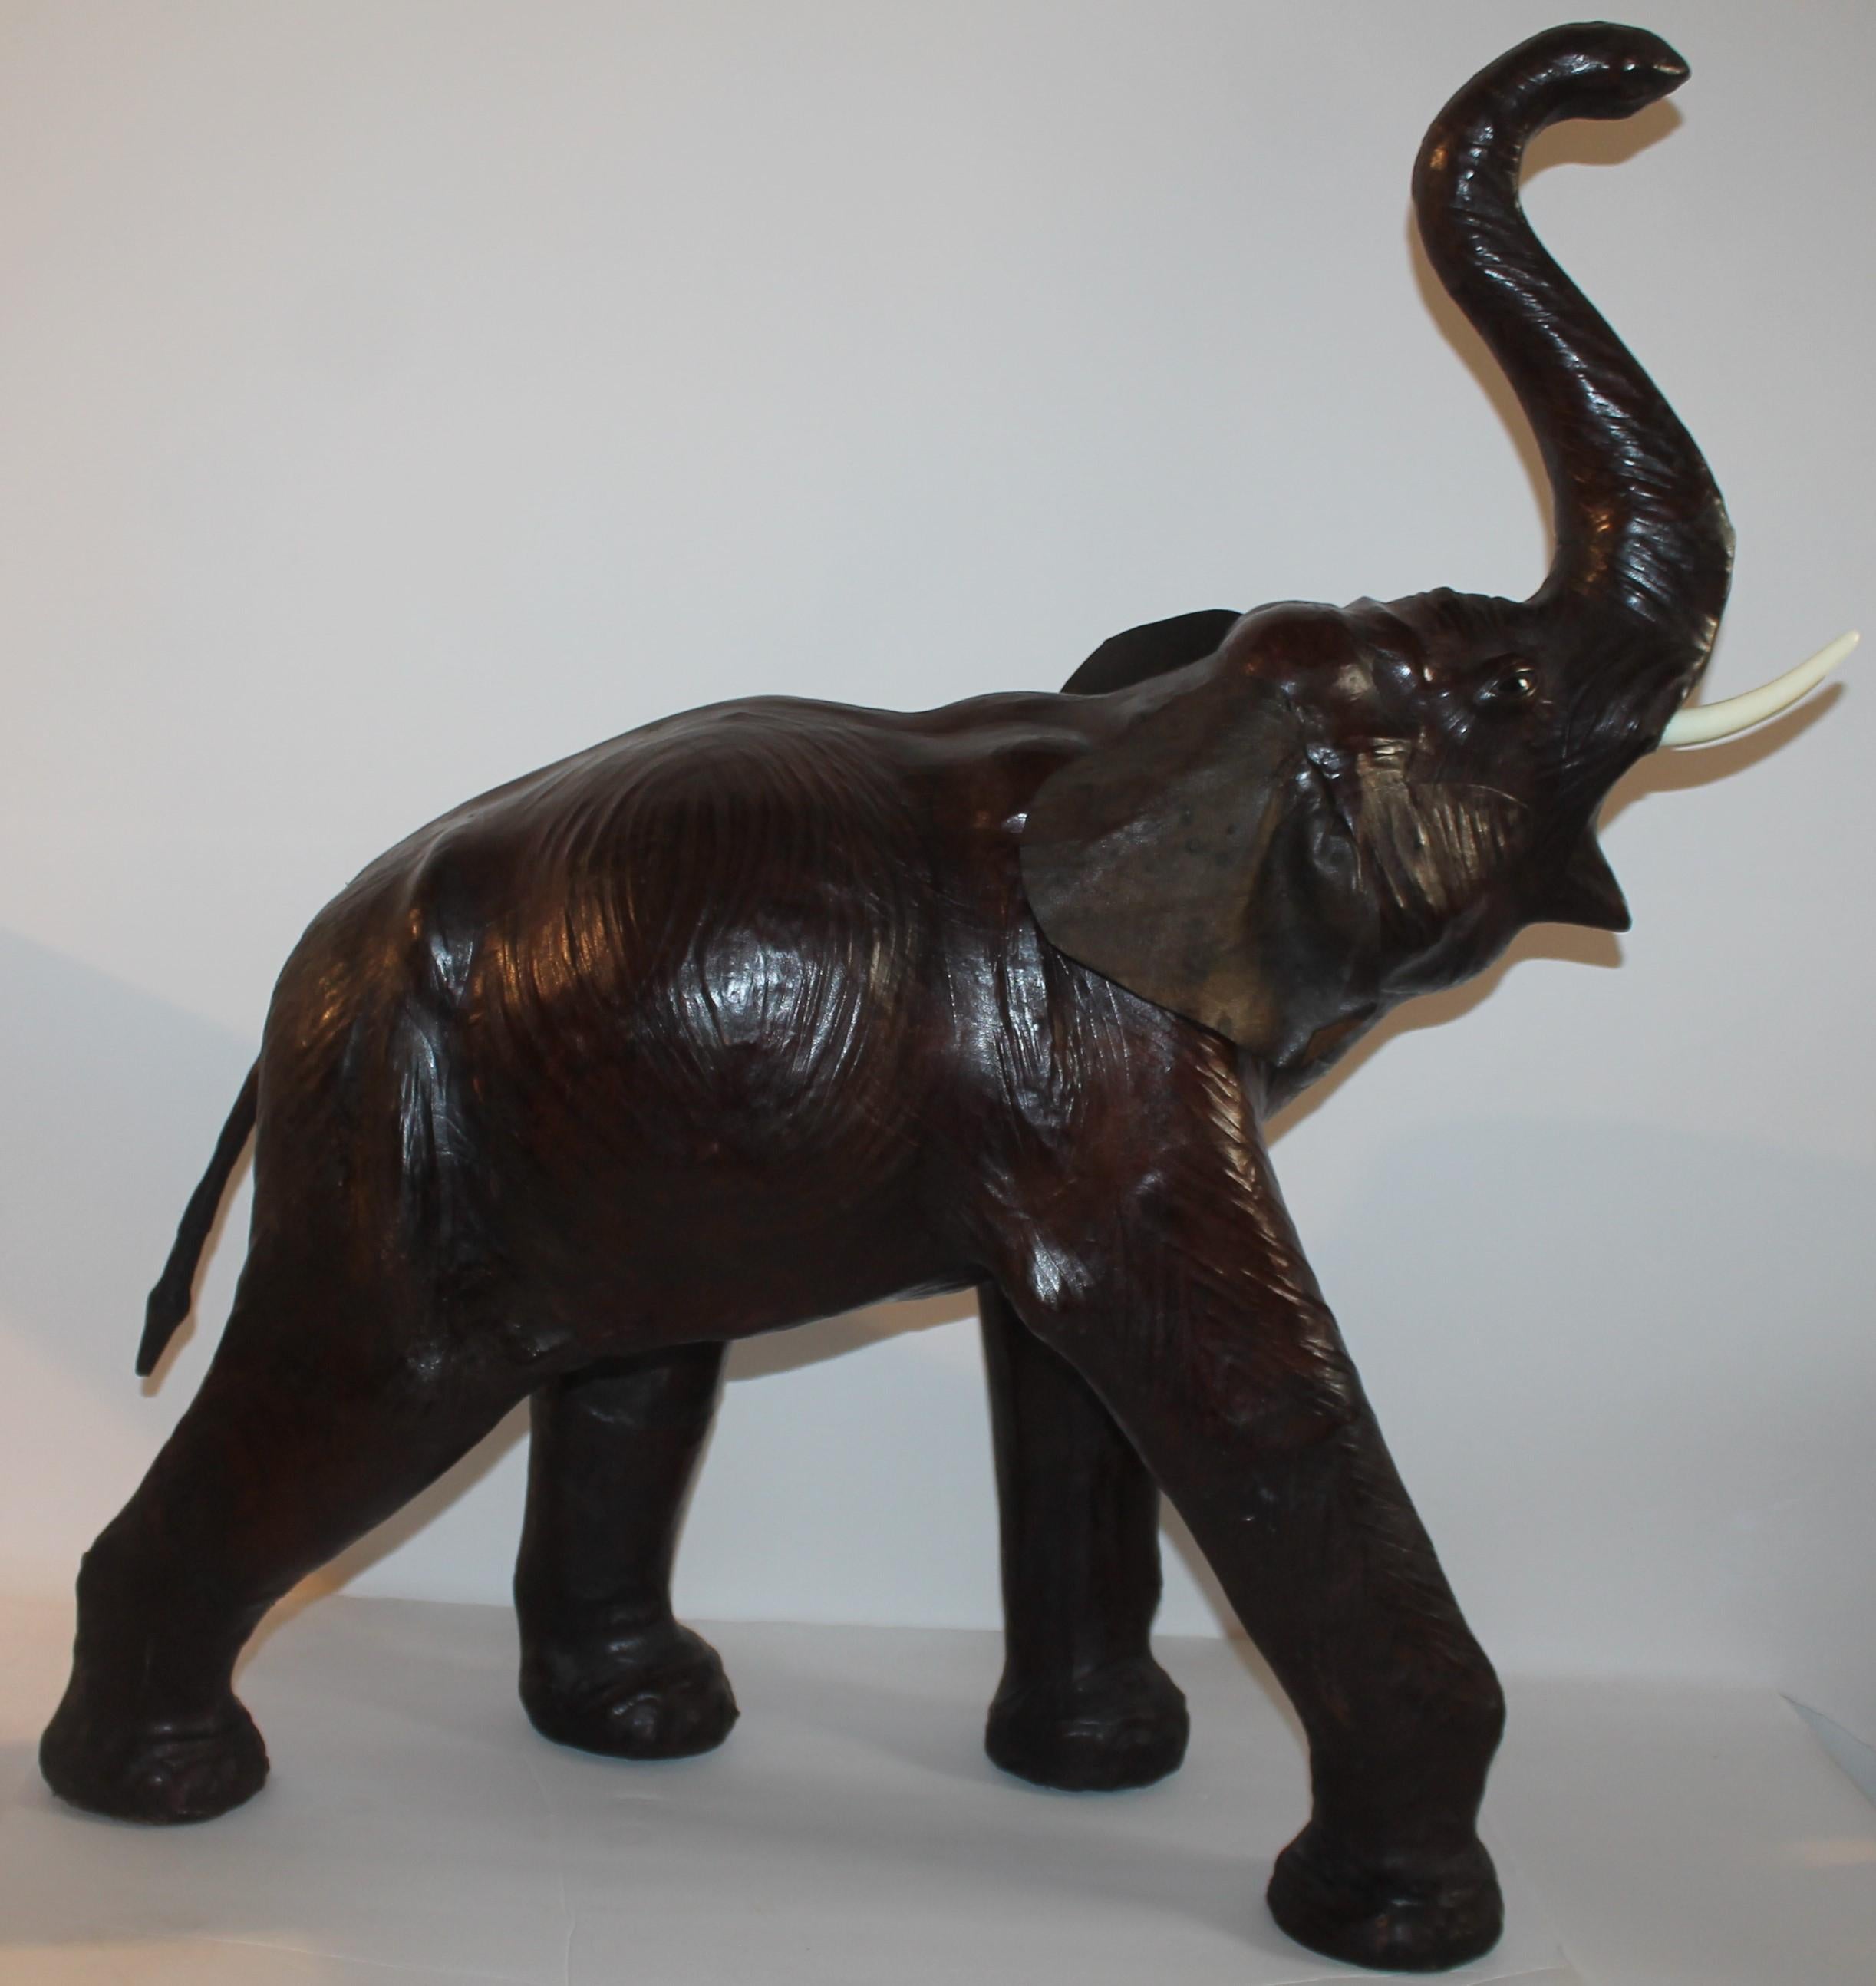 This large leather elephant is in fine as found condition. It looks like a real life baby elephant.